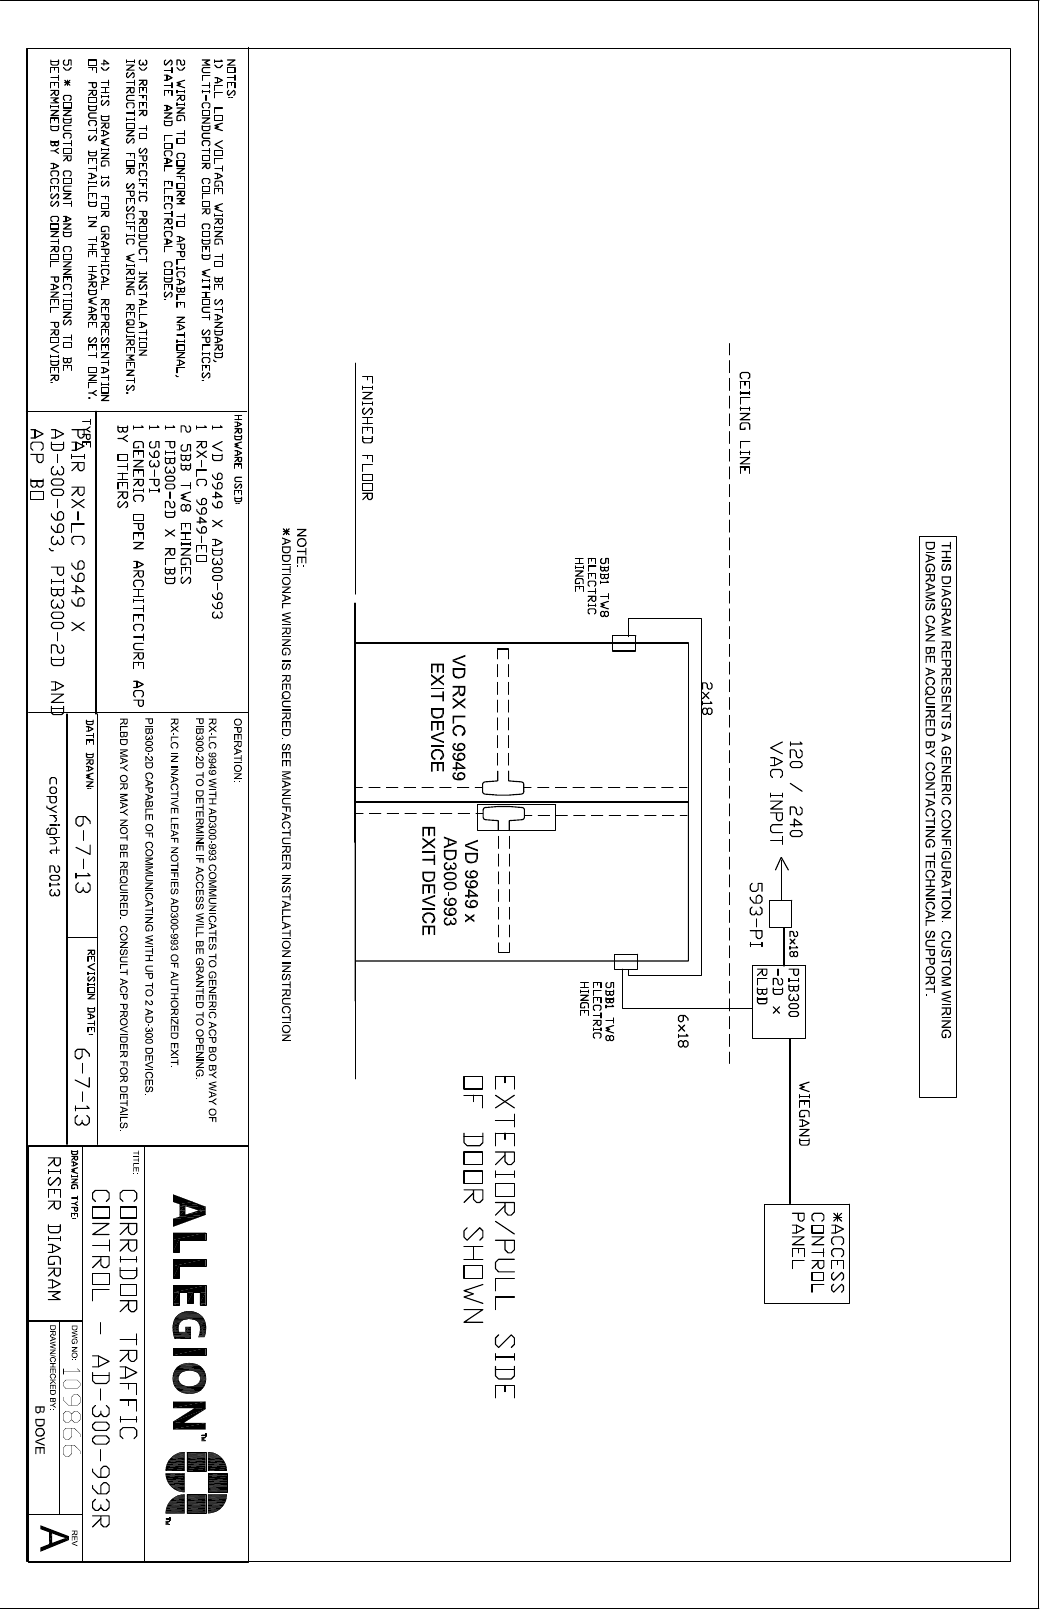 Page 2 of 3 - Von Duprin Corridor Traffic Control Application Illustration And Wiring Diagram 110131